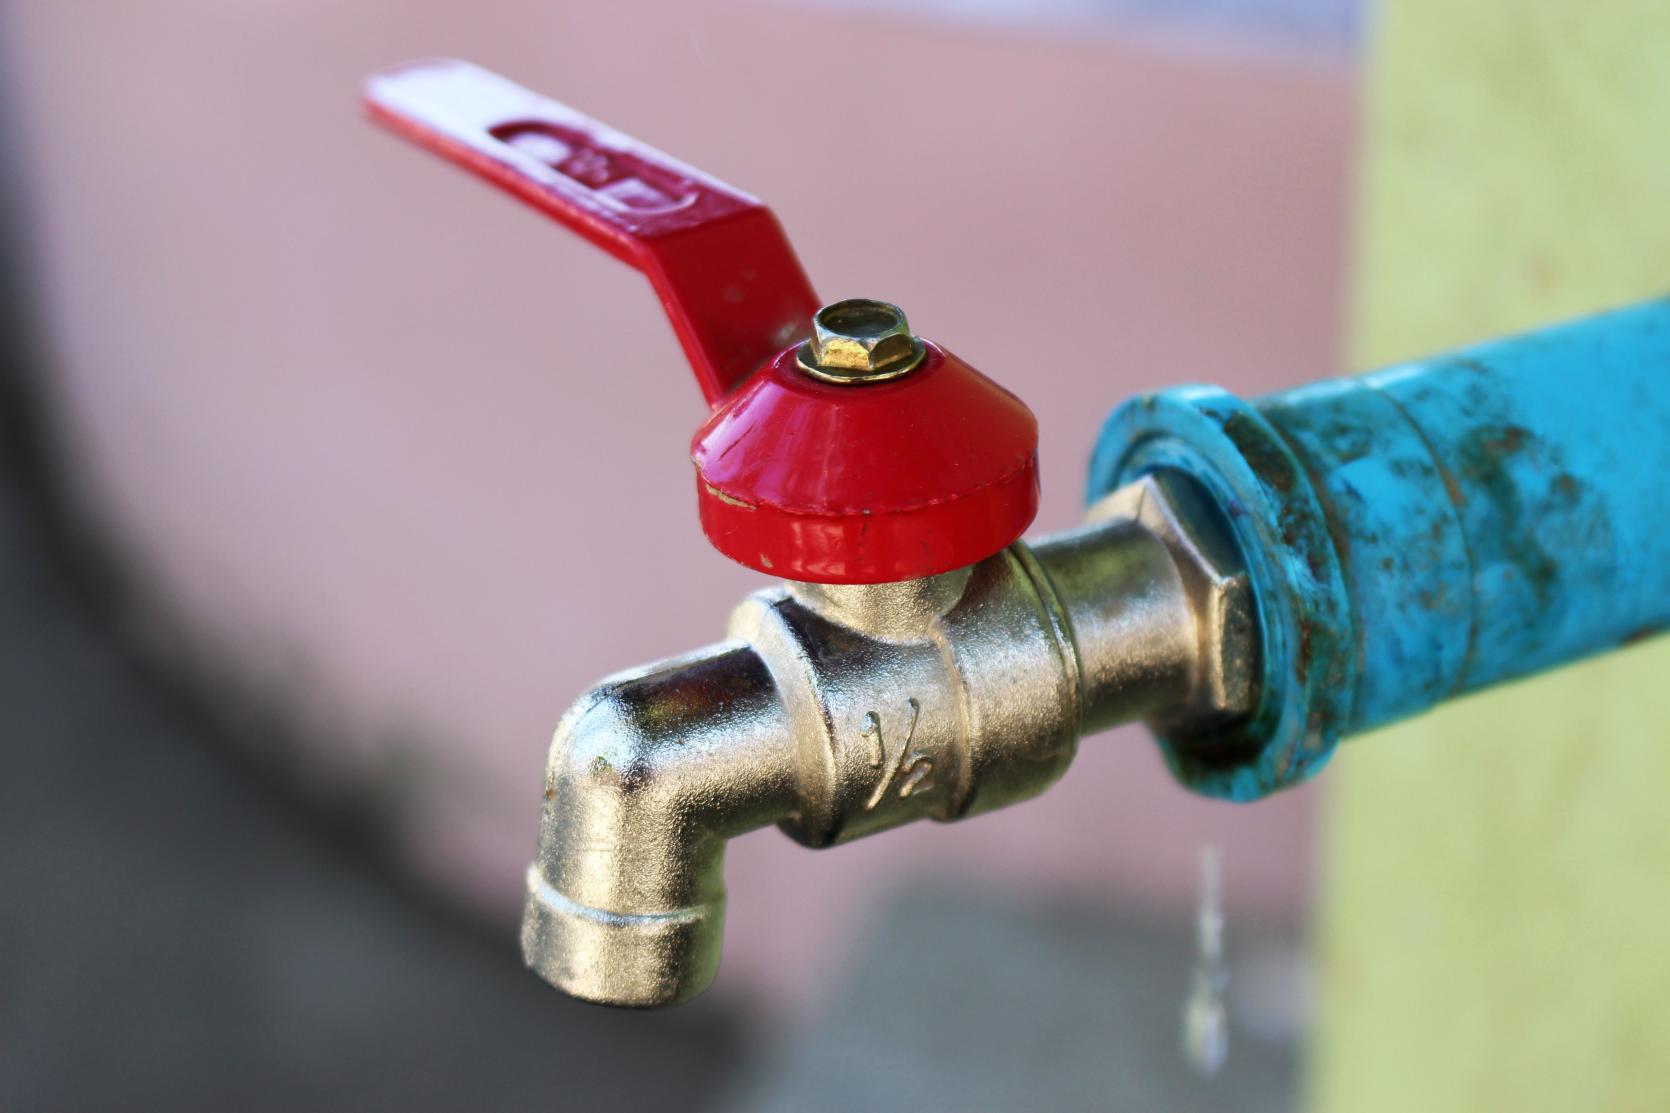 Outdoor water faucet with a red handle.